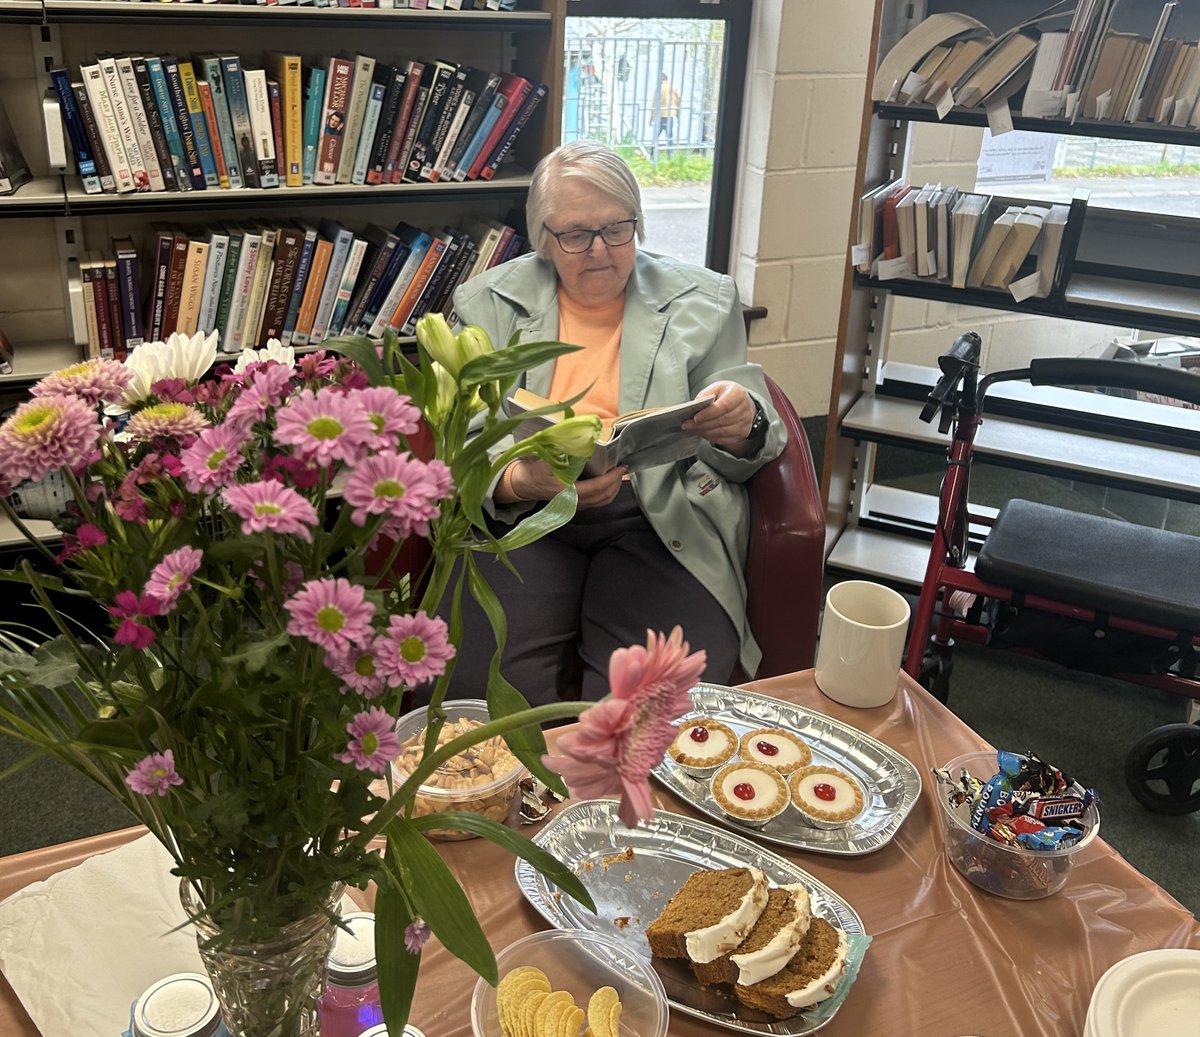 Coffee and cake at #Broadfield library this week to welcome back our customers and #volunteers. We caught up with one of our regulars and learned she was named after Mirabelle the Fairy from the #RupertTheBear stories – now everyone knows her name! @BroadfieldComm @crawleybc